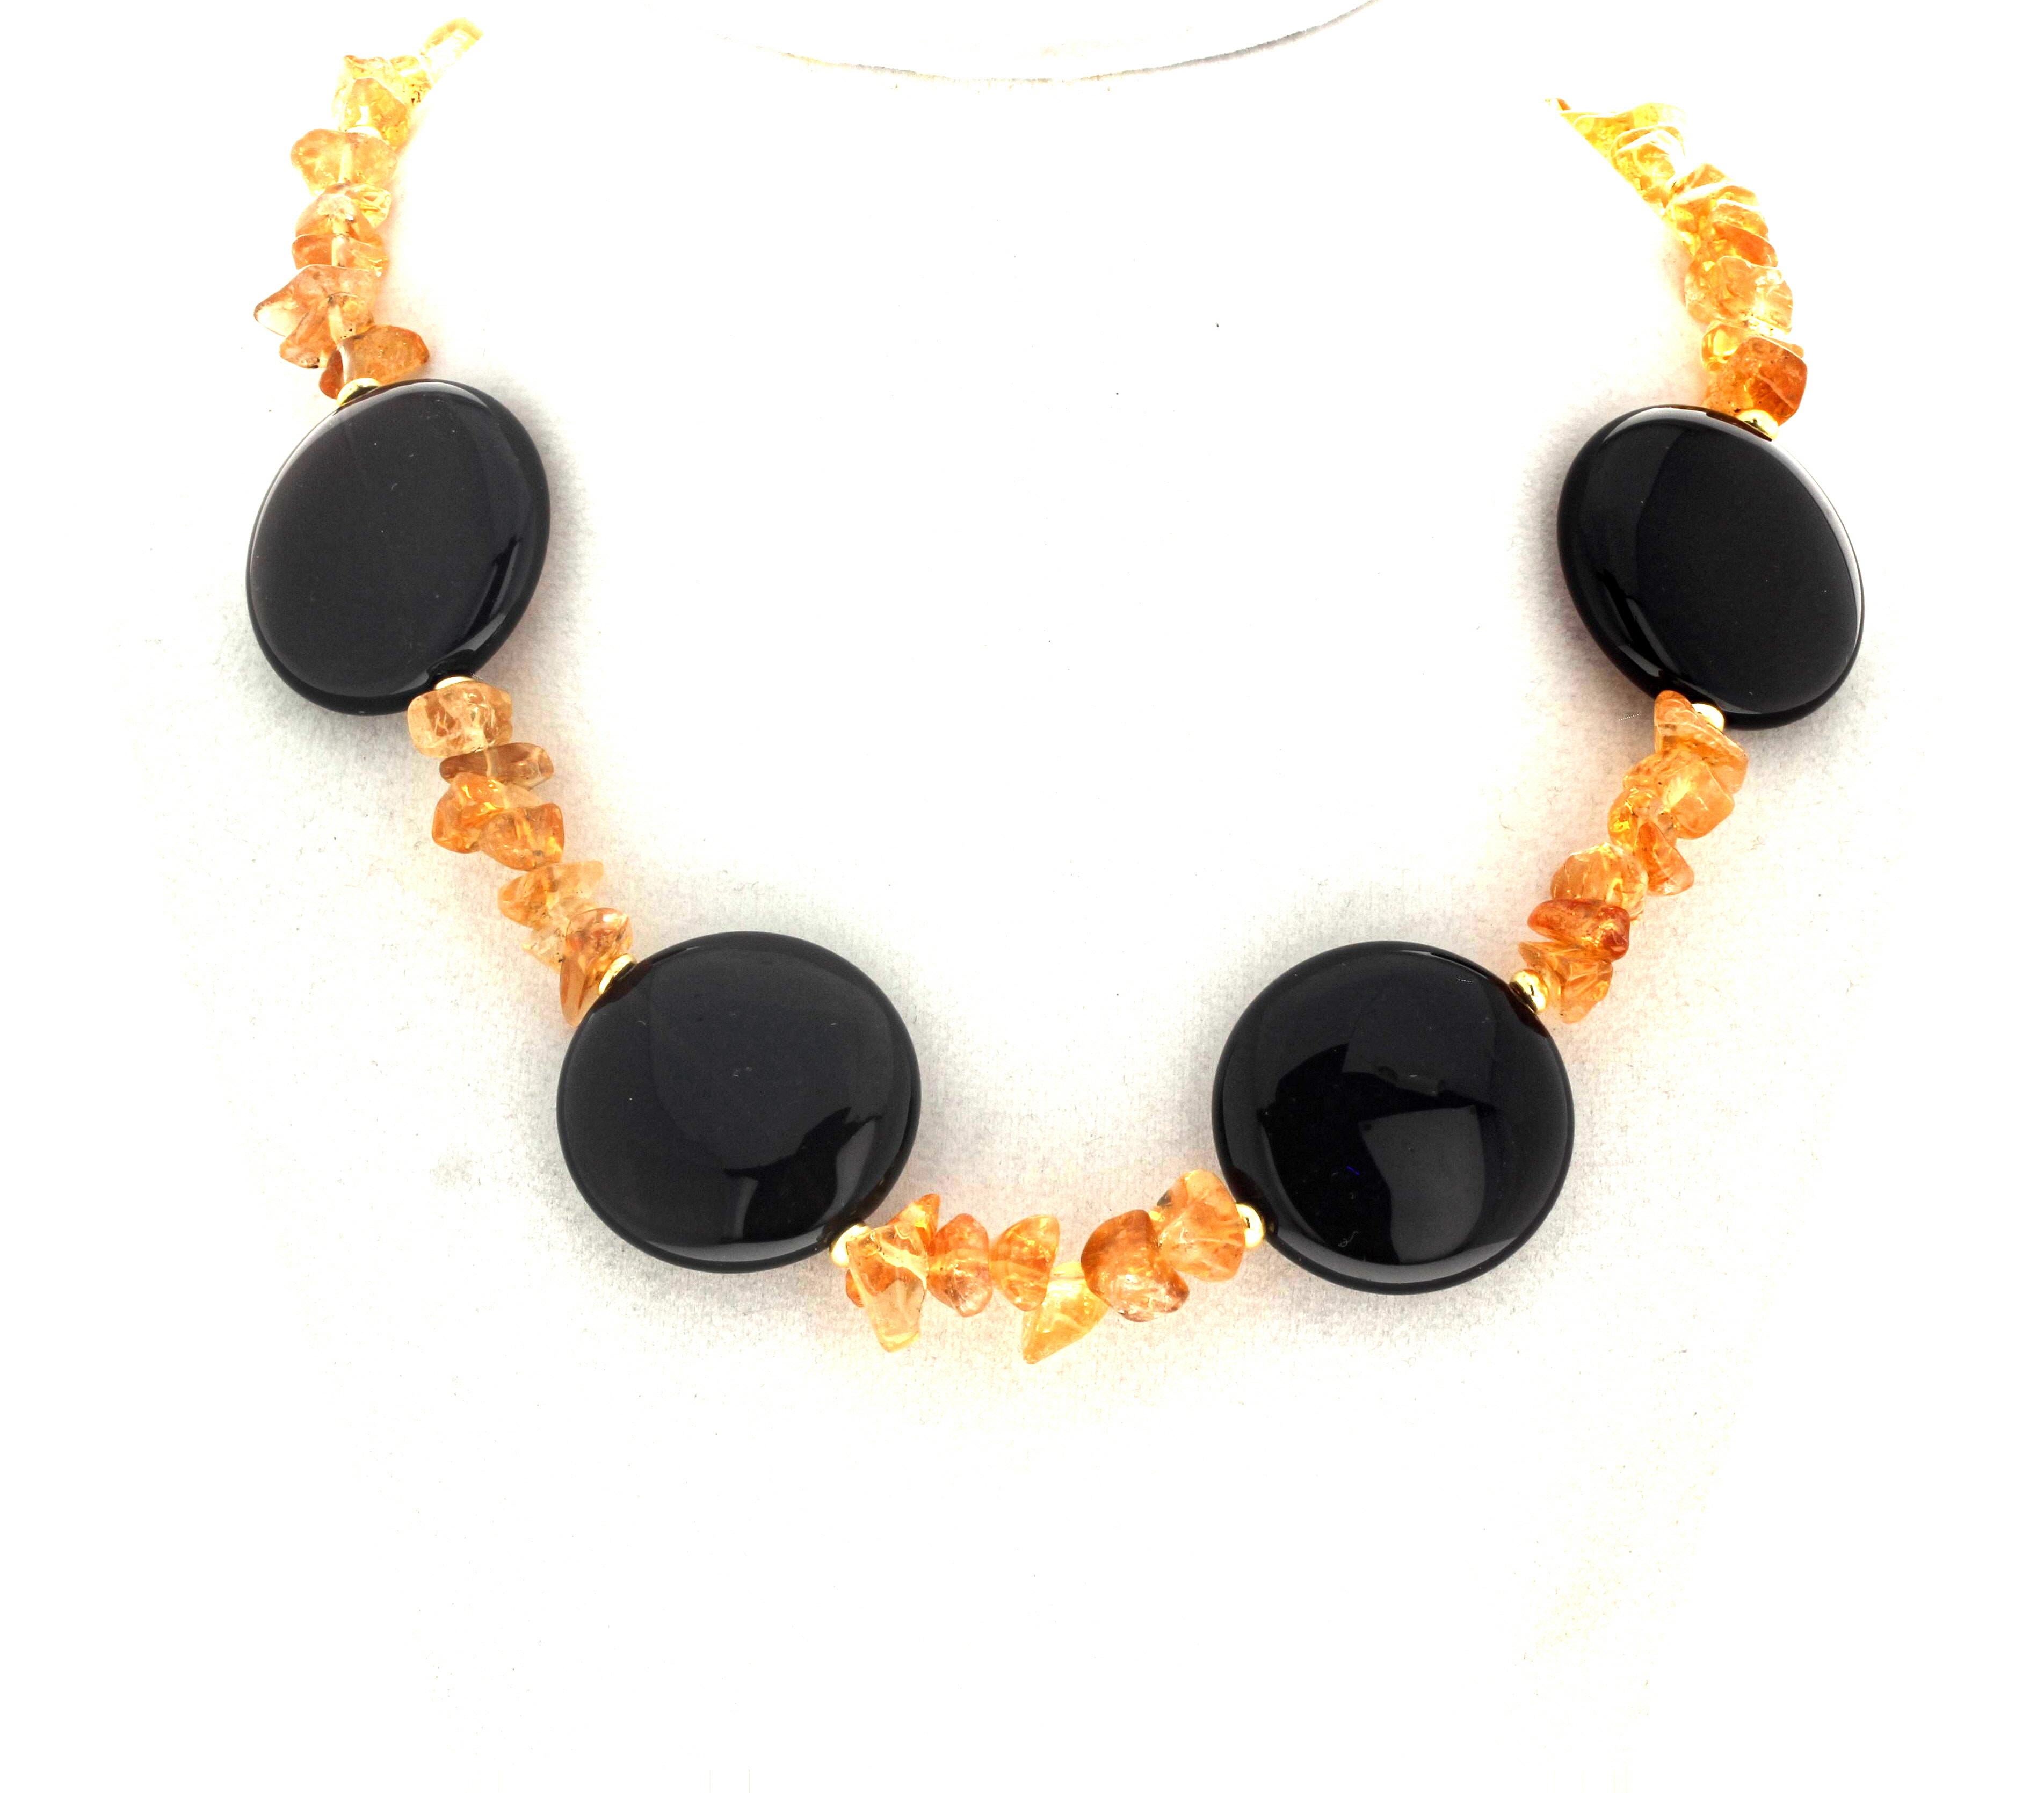 These slightly dramatic outstanding polished natural goldy yellow Citrine chips show off these highly polished natural round dark brown Citrines in this 17 3/4 inch long necklace.  The largest Citrine chips are approximately 10mm and the beautiful